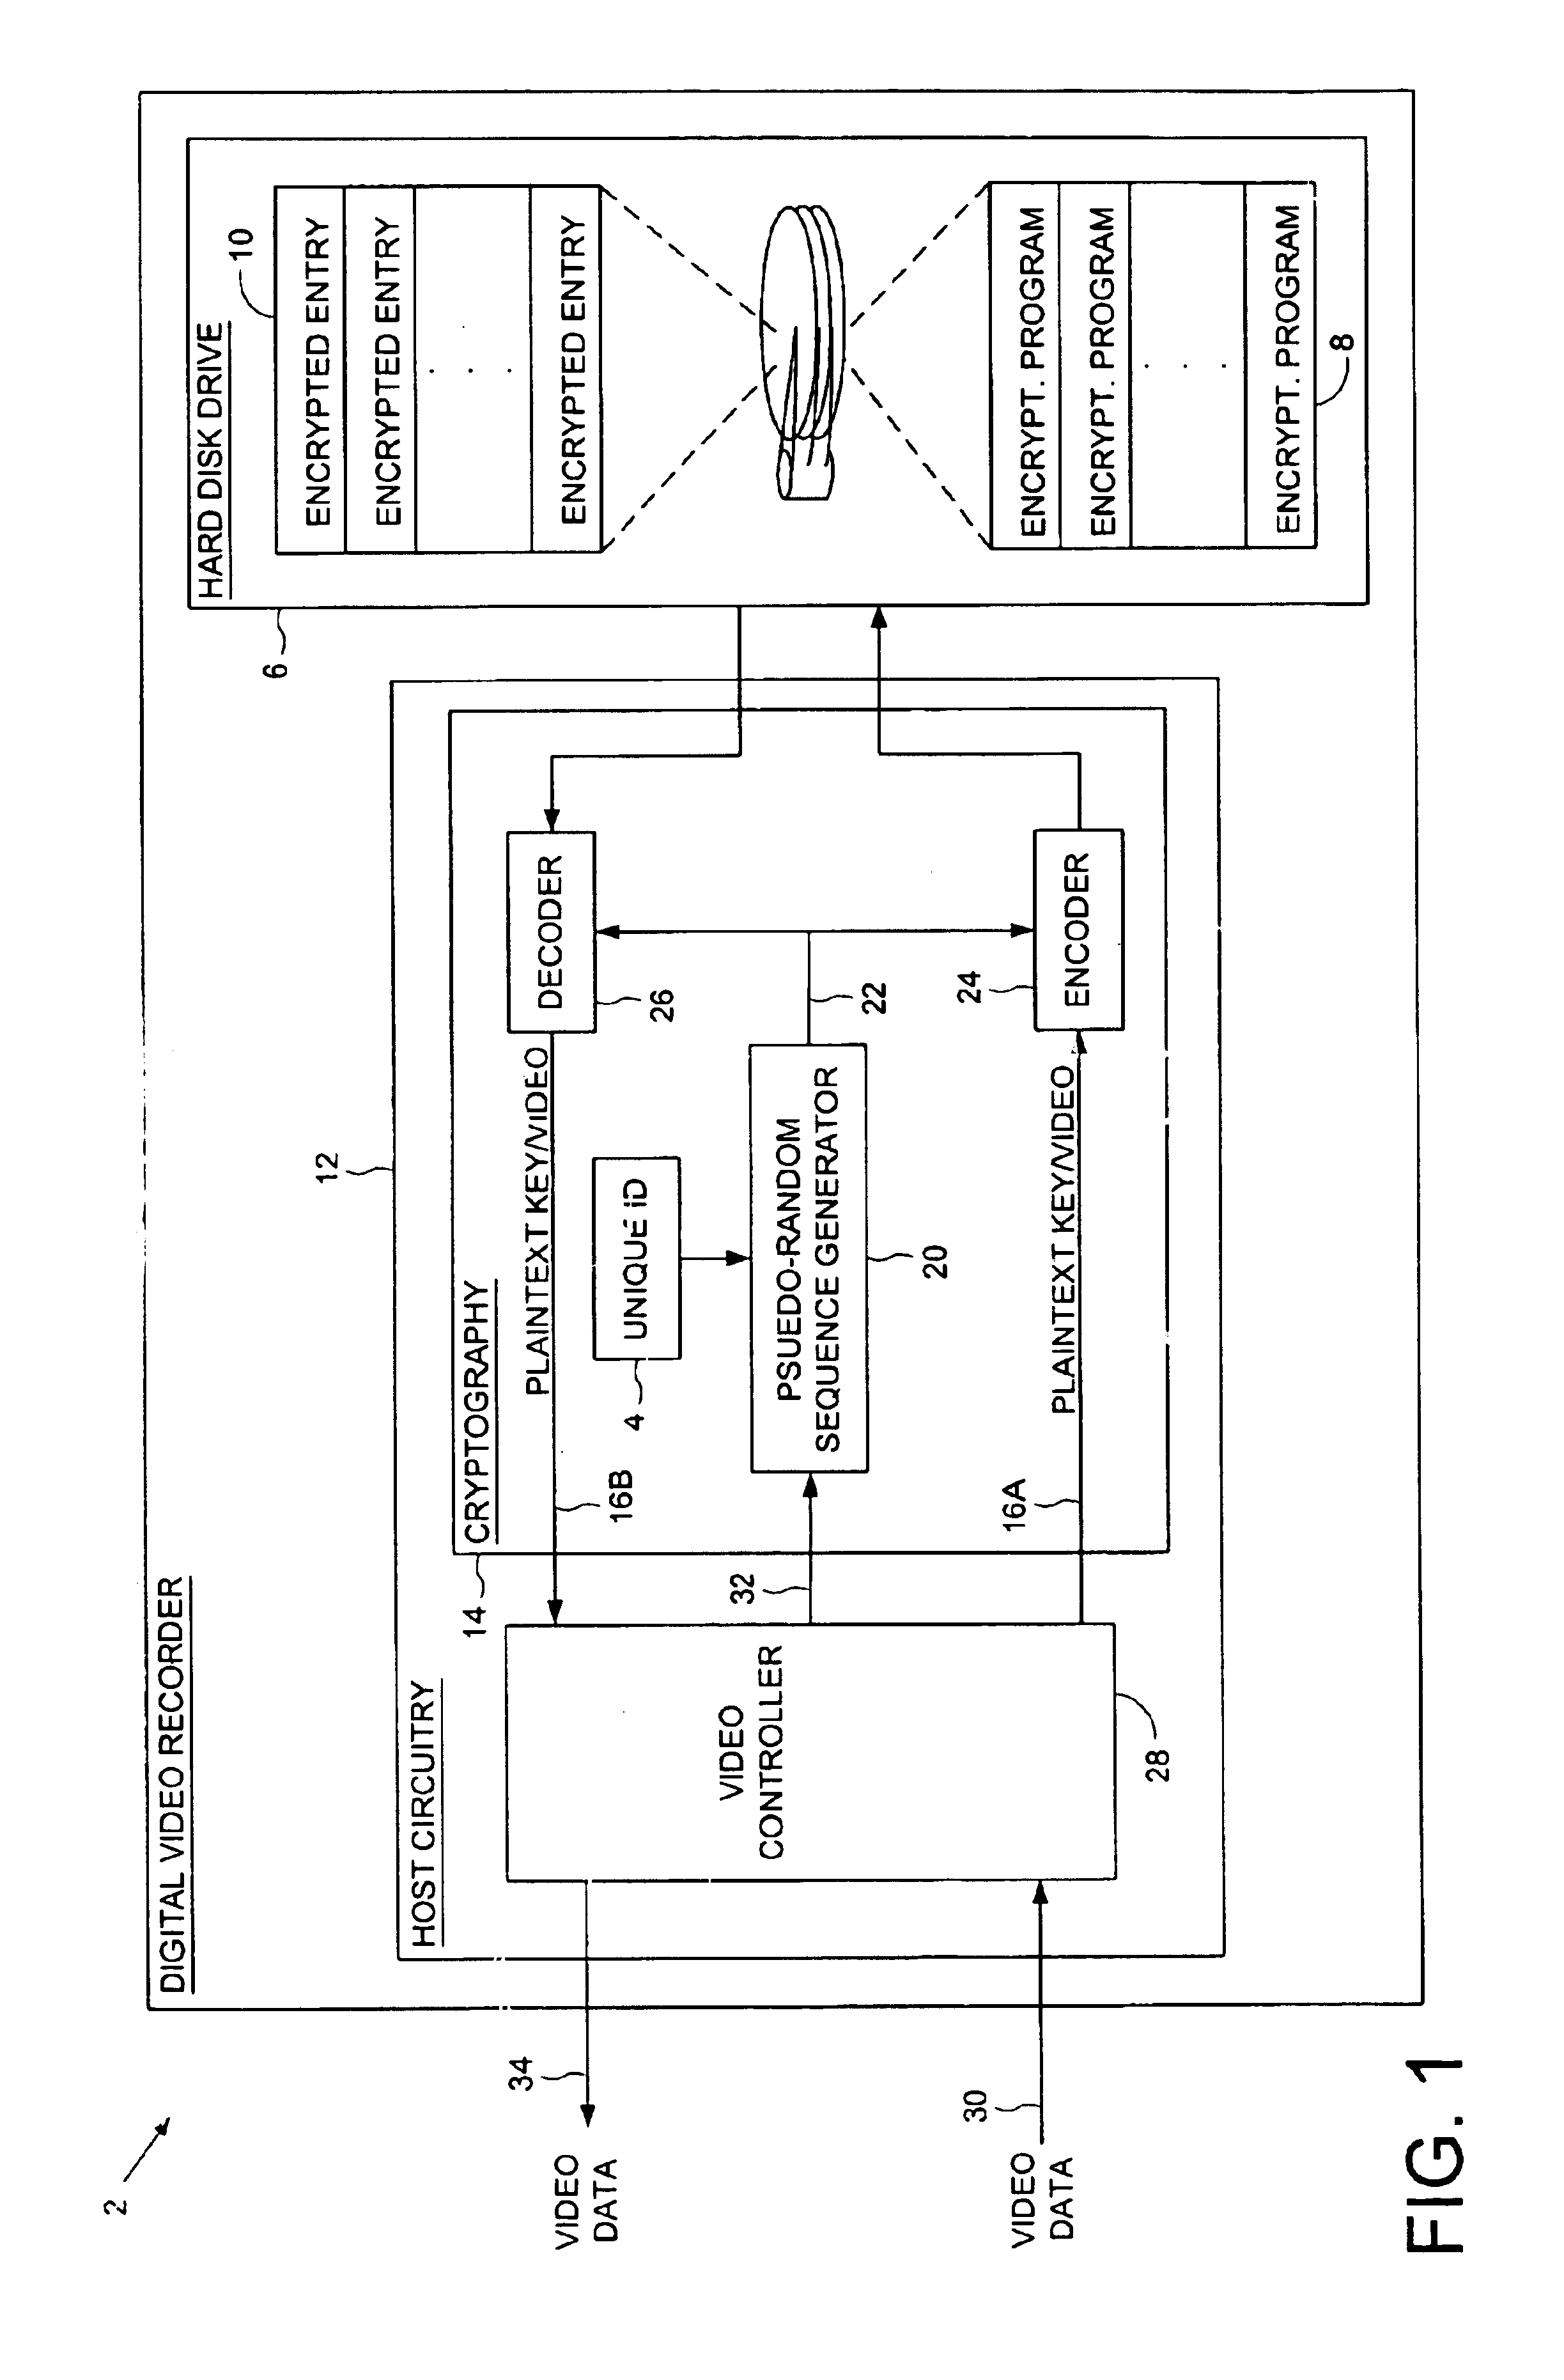 Digital video recorder employing a file system encrypted using a pseudo-random sequence generated from a unique ID